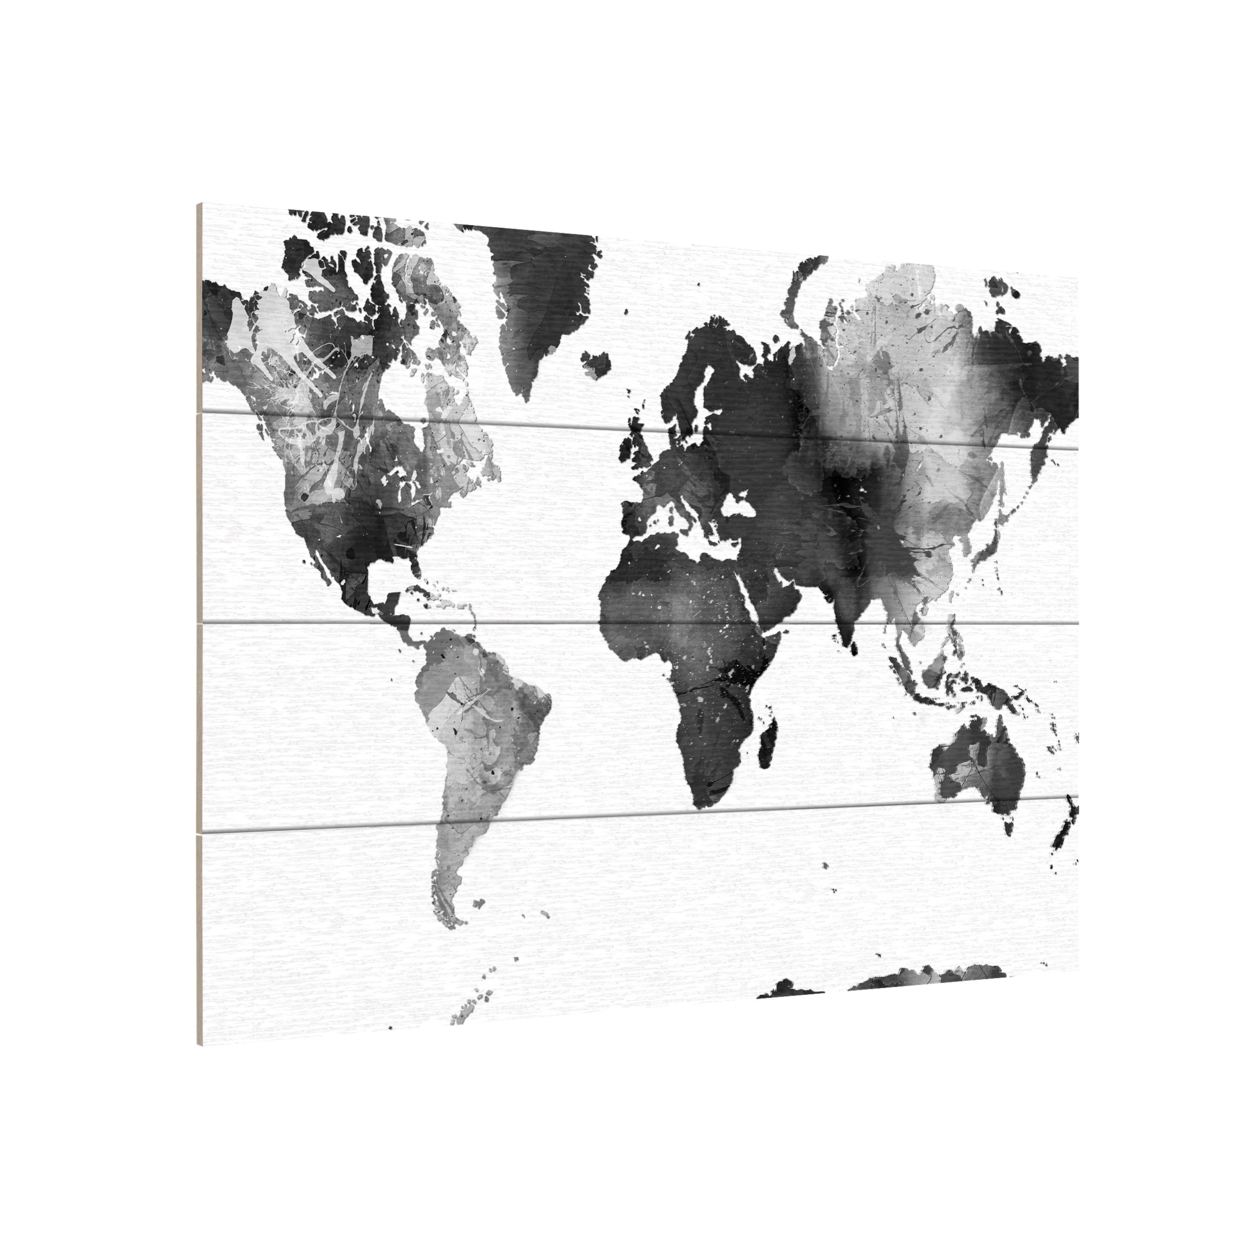 Wall Art 12 X 16 Inches Titled World Map BG-1 Ready To Hang Printed On Wooden Planks